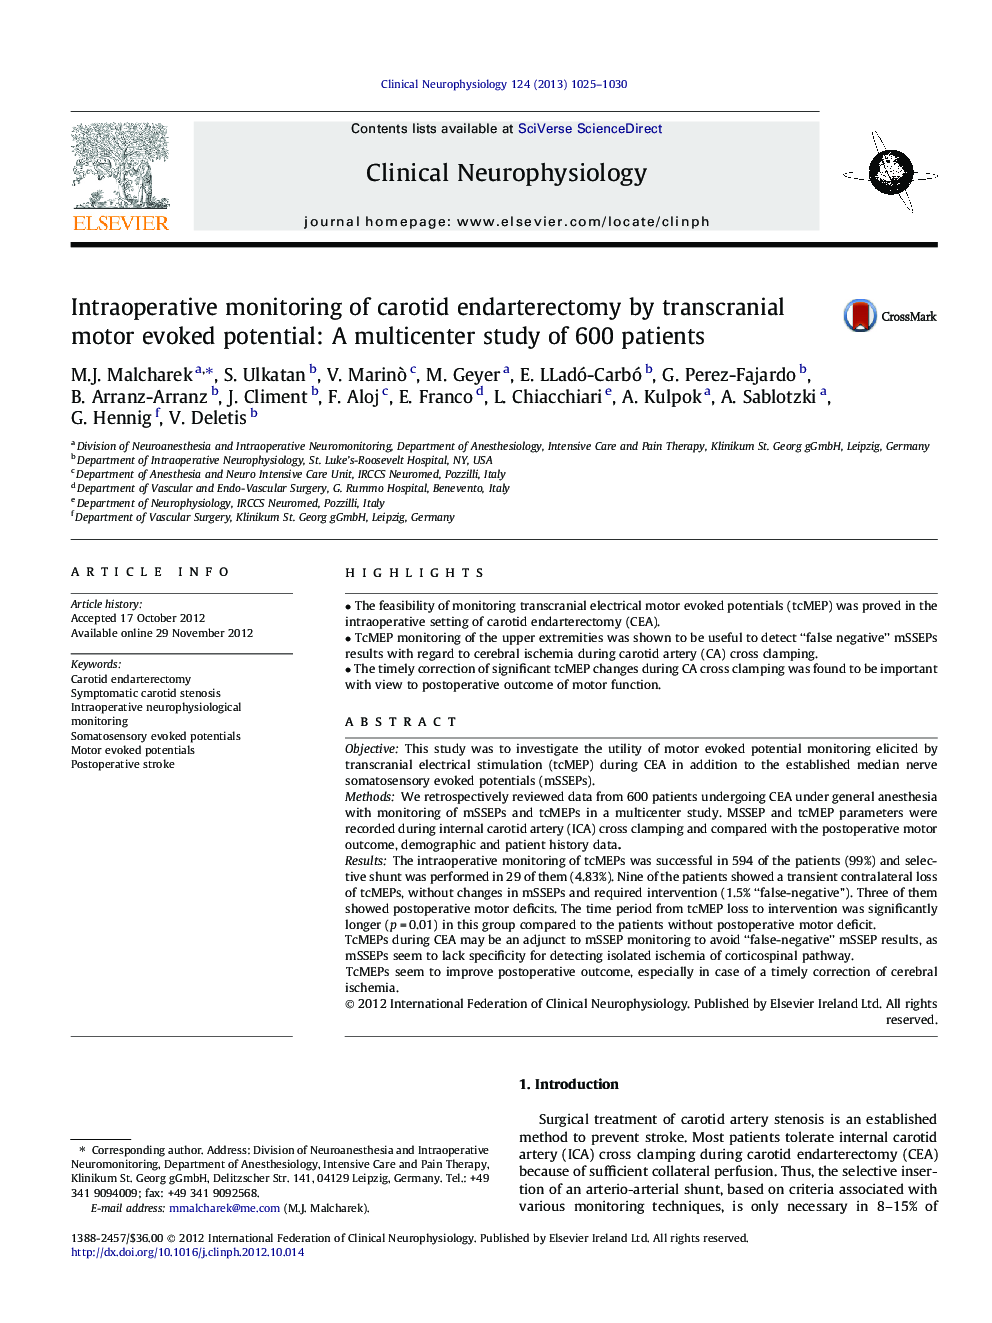 Intraoperative monitoring of carotid endarterectomy by transcranial motor evoked potential: A multicenter study of 600 patients